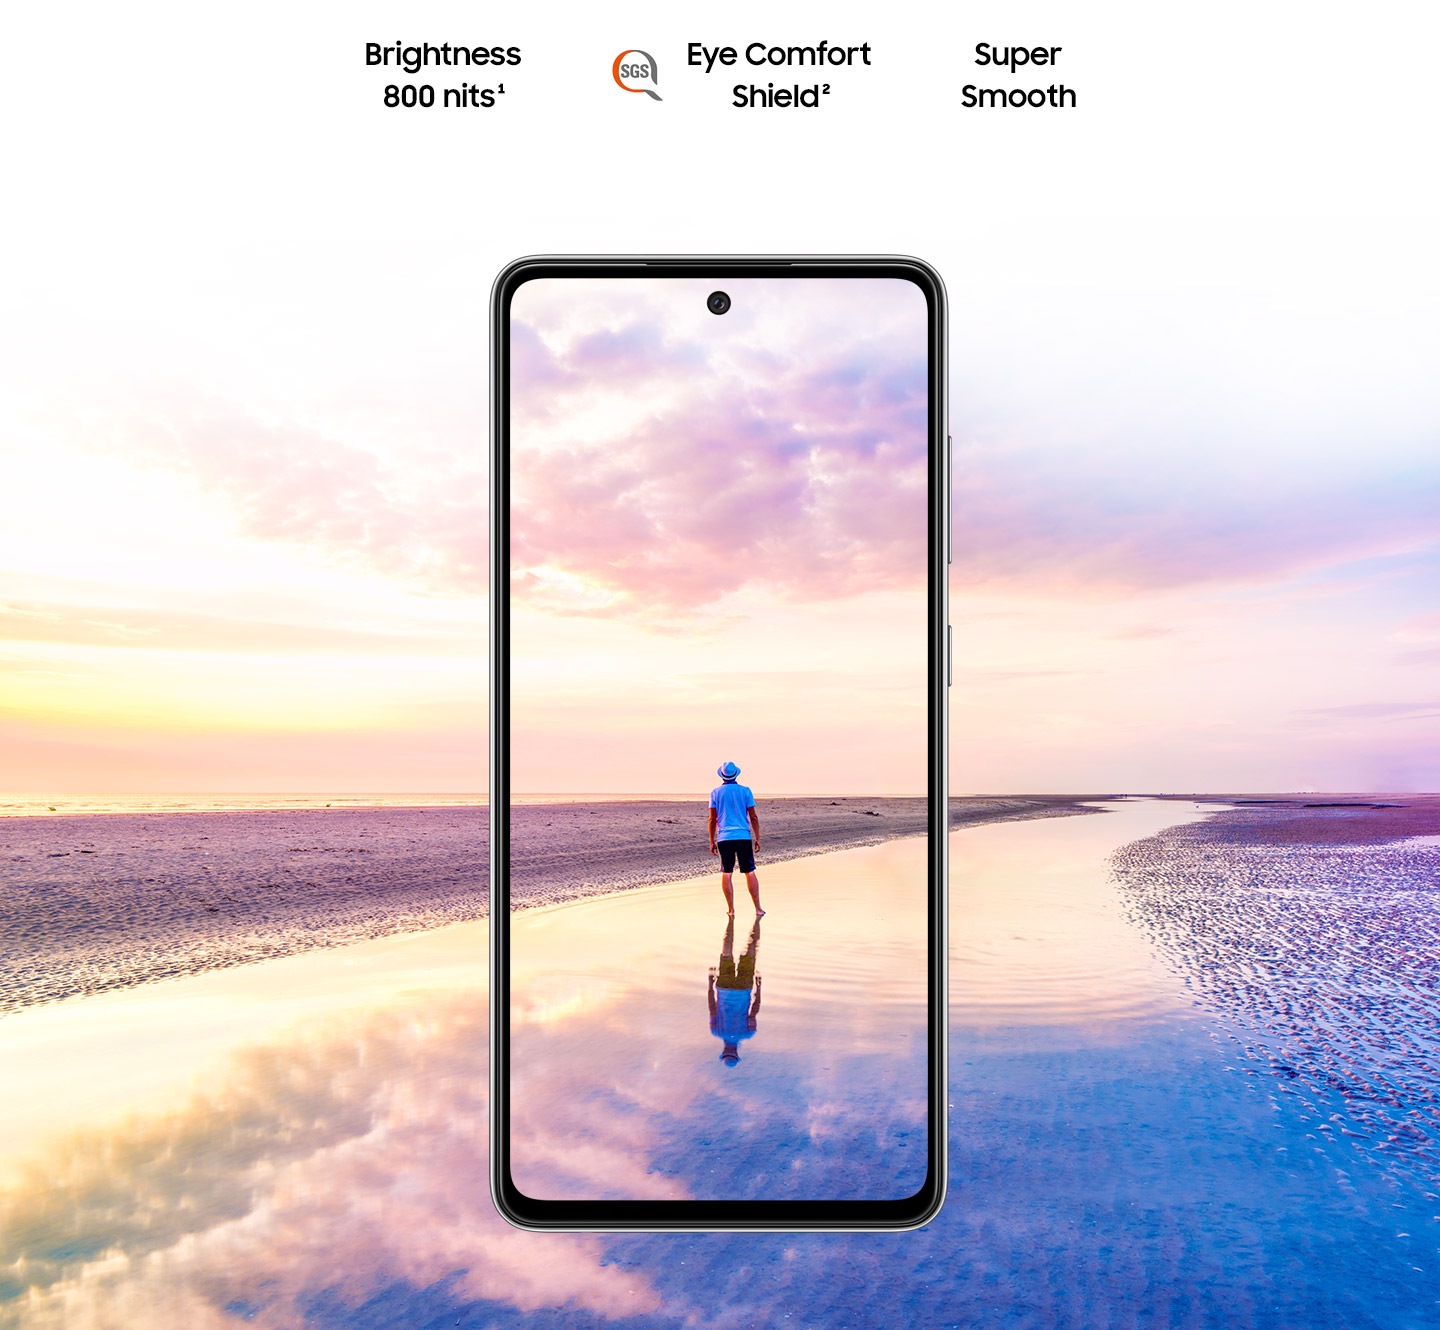 Galaxy A52 5G seen from the front. A scene of a man standing on a beach at sunset with pink and blue colours in the sky expands outside of the boundaries of the display. Text says Super Smooth, Brightness 800 nits and Eye Comfort Shield, with the SGS logo.